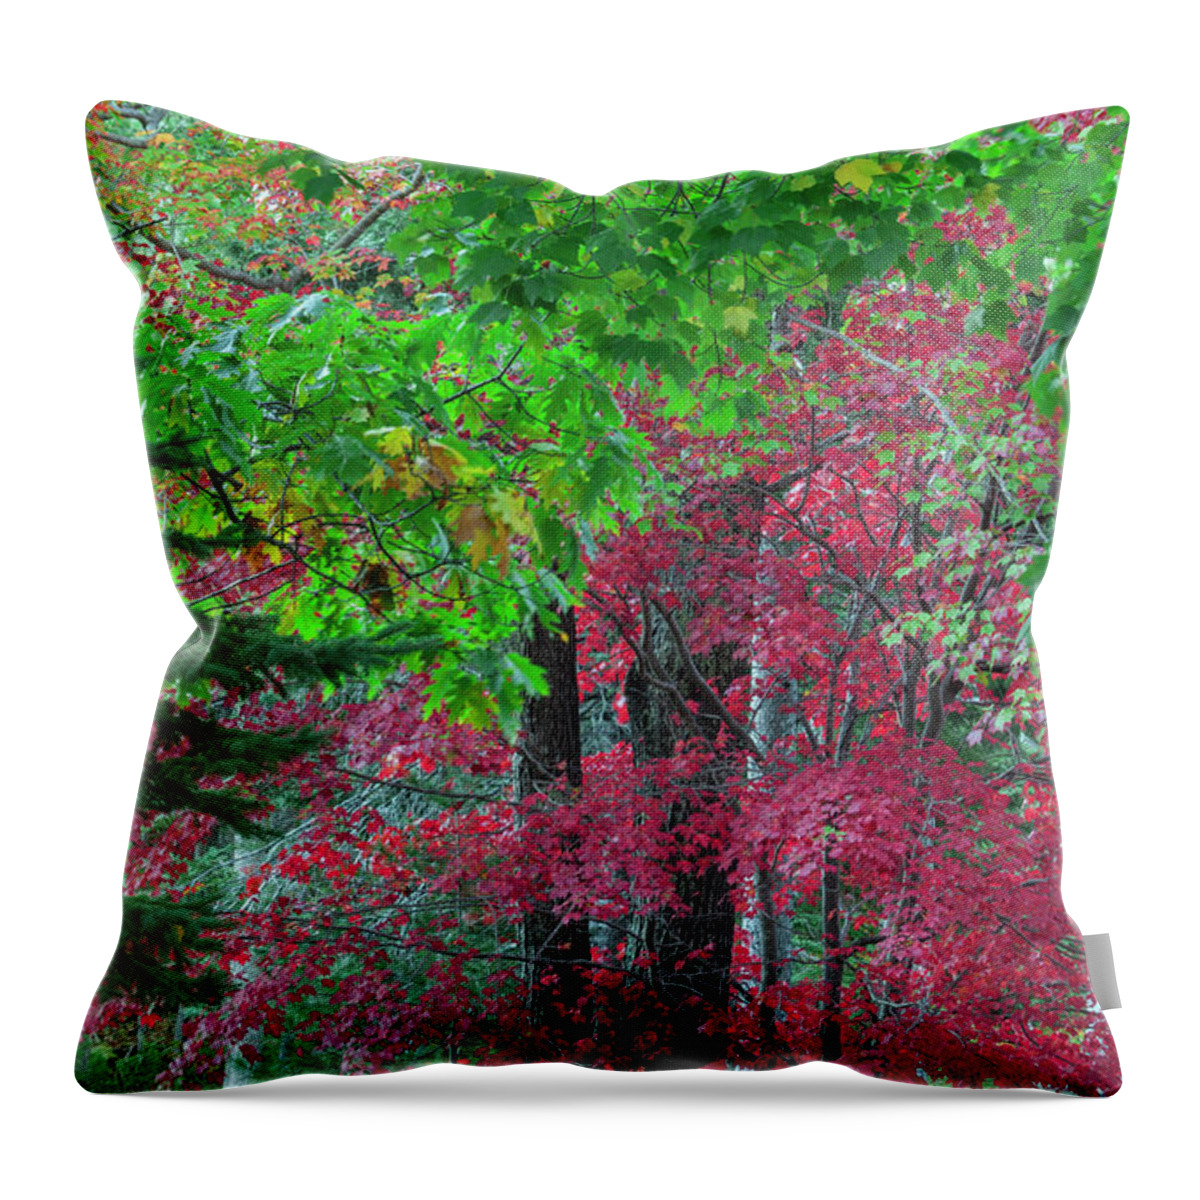 Tranquility Throw Pillow featuring the photograph Autumn Forest Colors In Maine by Jerry Whaley